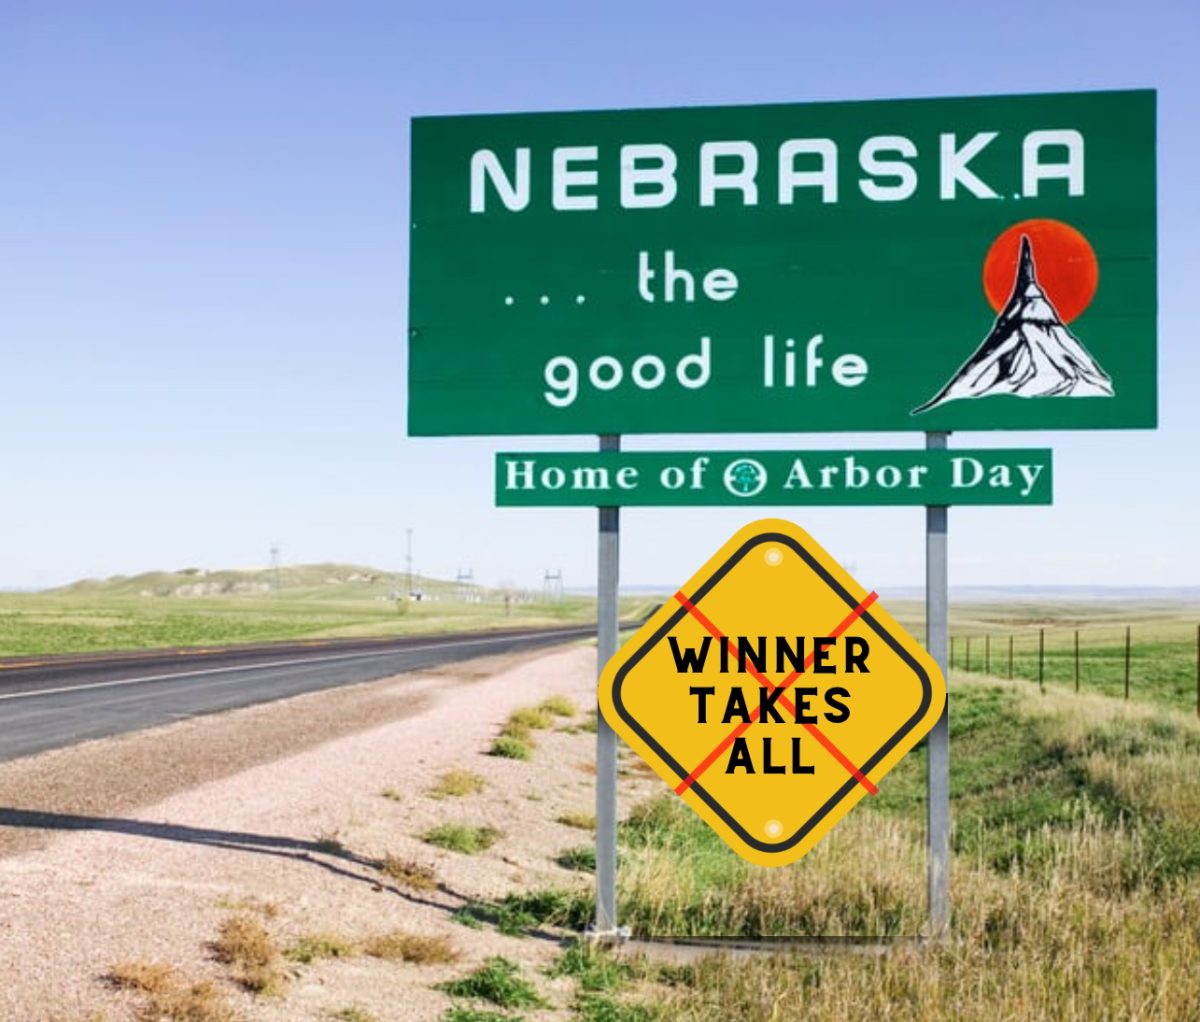 Image of Nebraska road sign and a yellow hazard containing the text “winner takes all” with a red x over it.